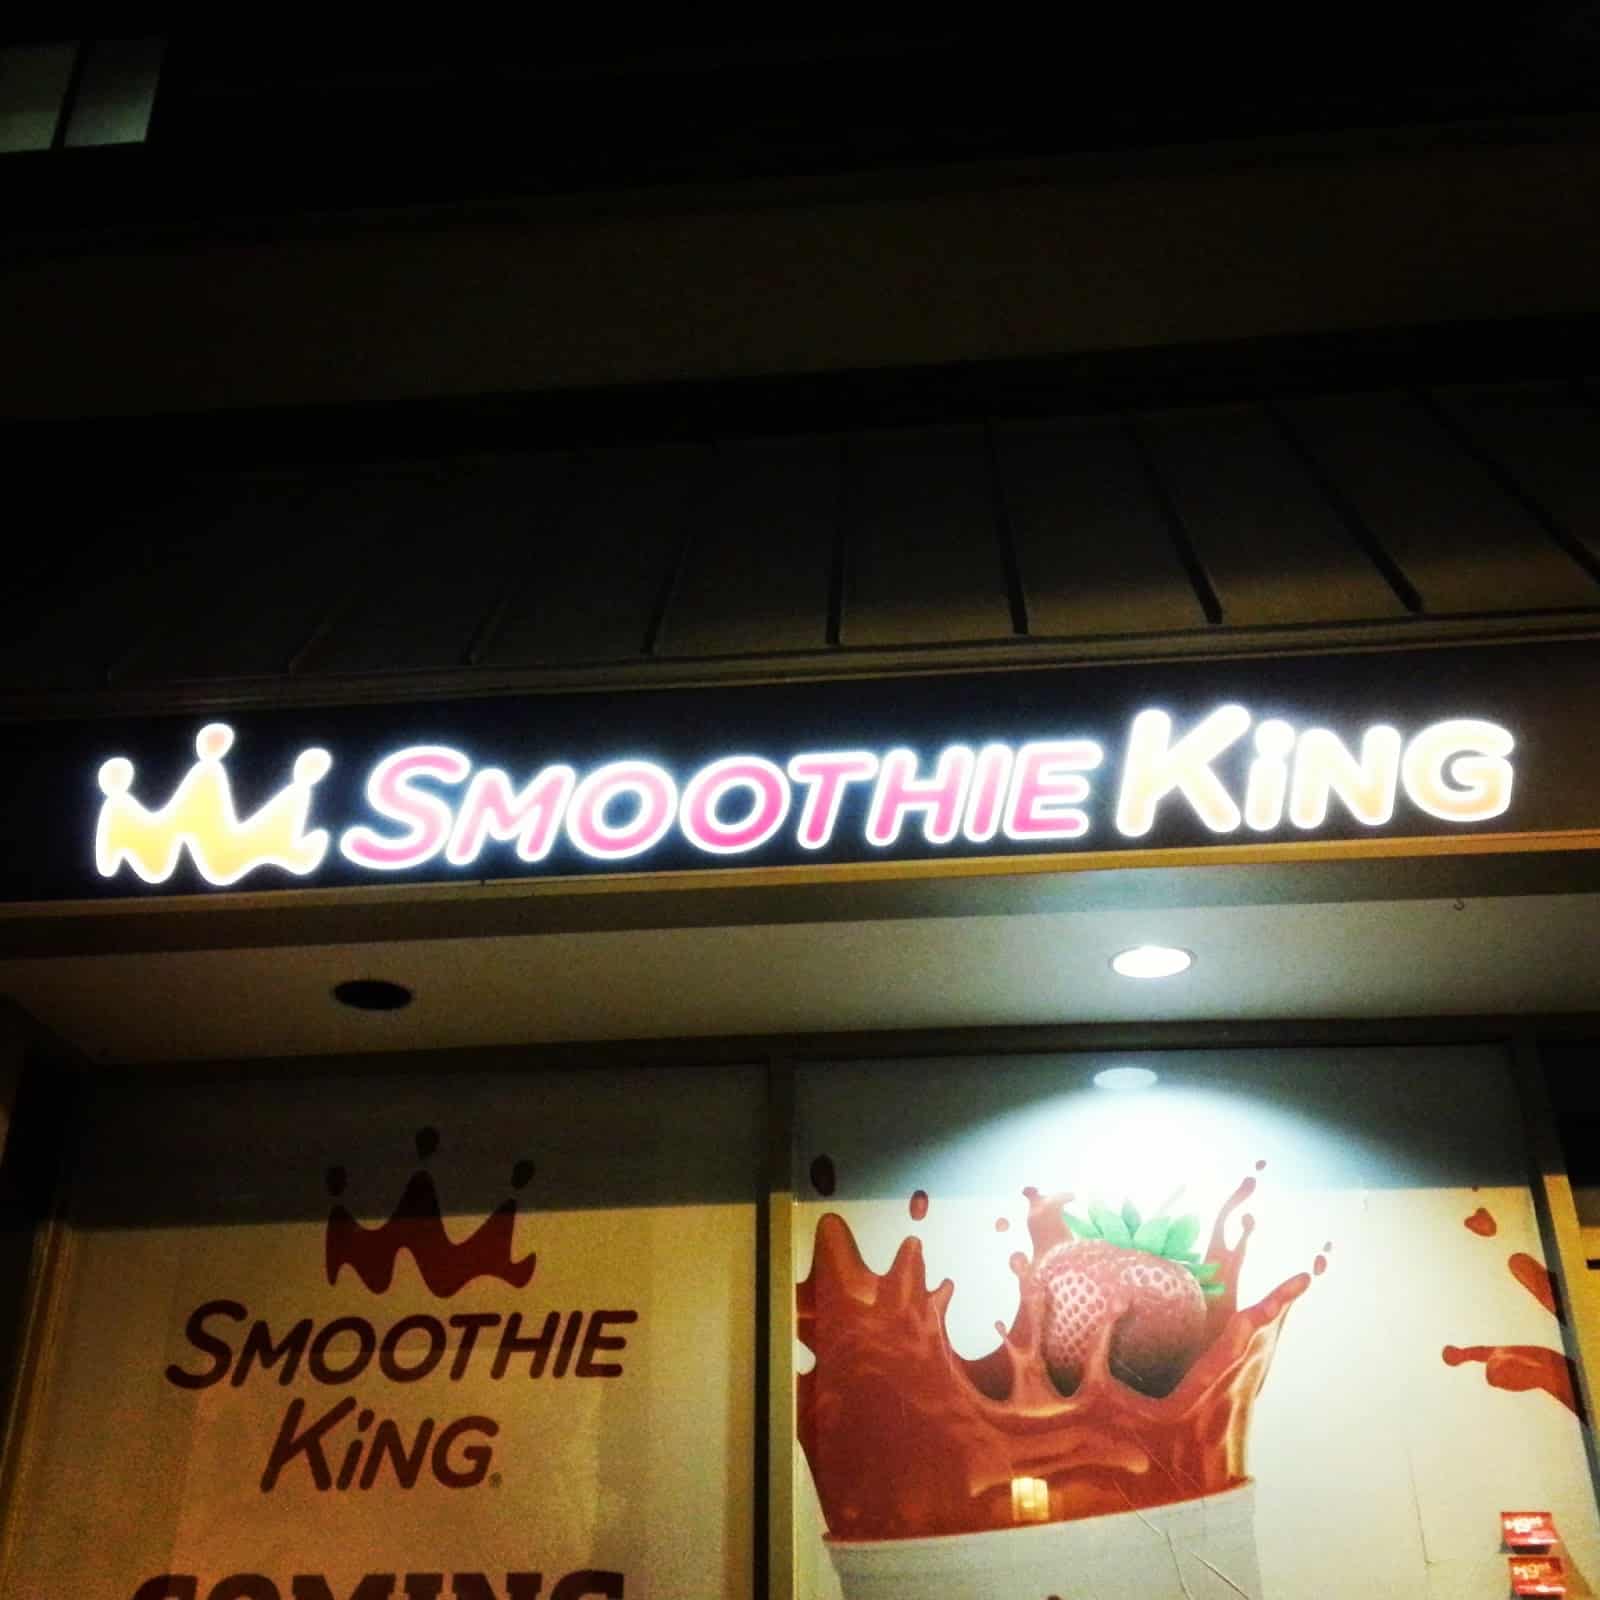 Robert Dyer @ Bethesda Row: SMOOTHIE KING POSTS PERMANENT SIGN ON ...